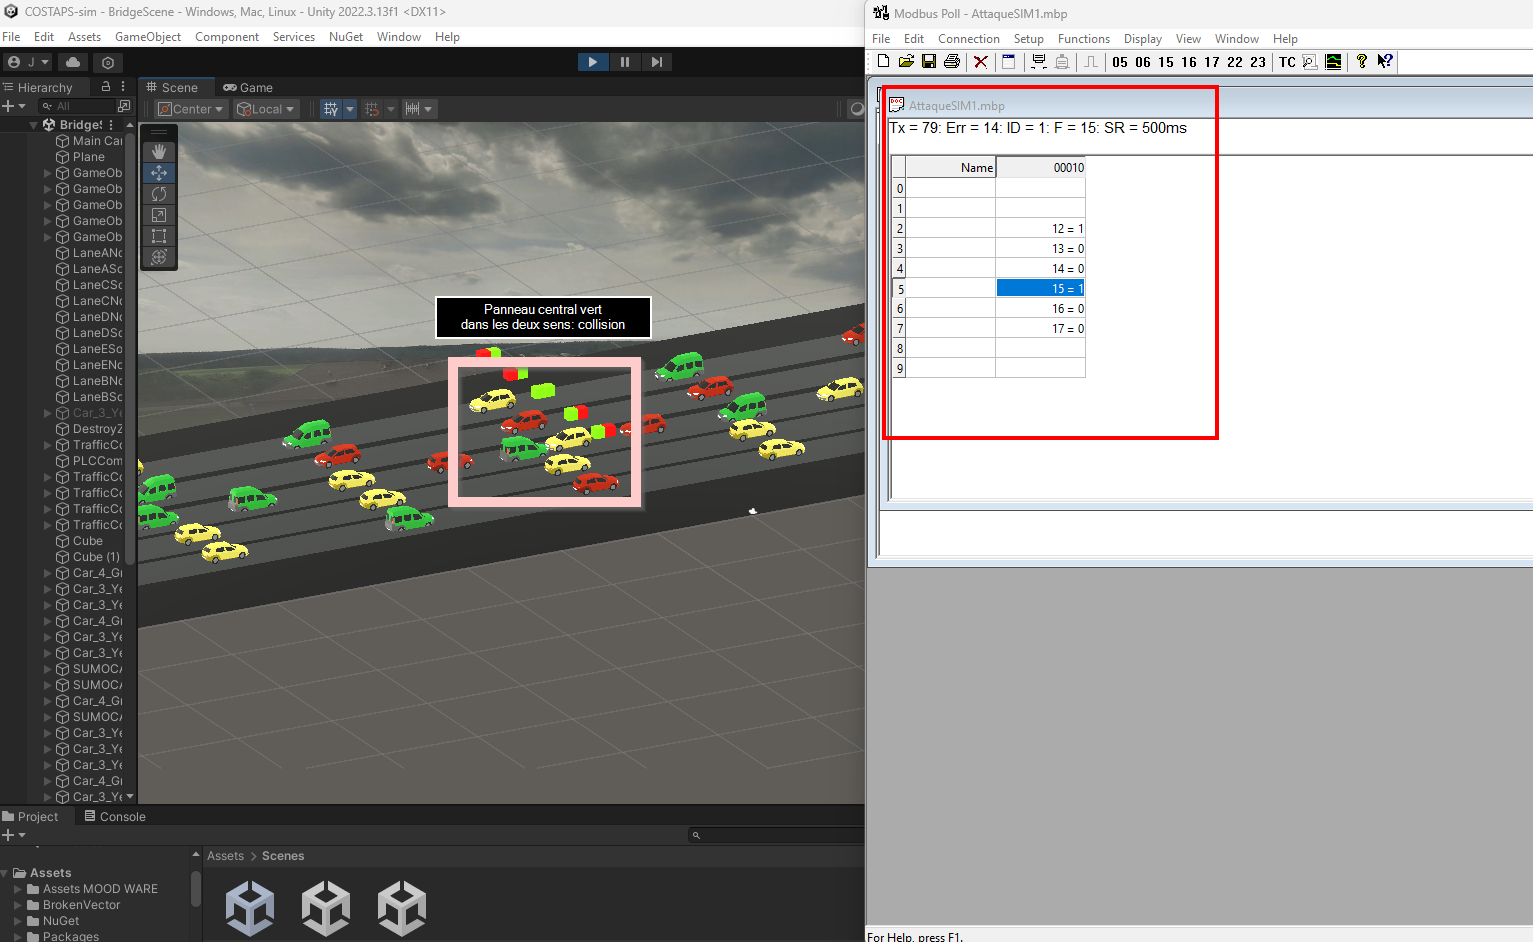 Co-simulation of a Road Infrastructure Using Modbus TCP With Unity